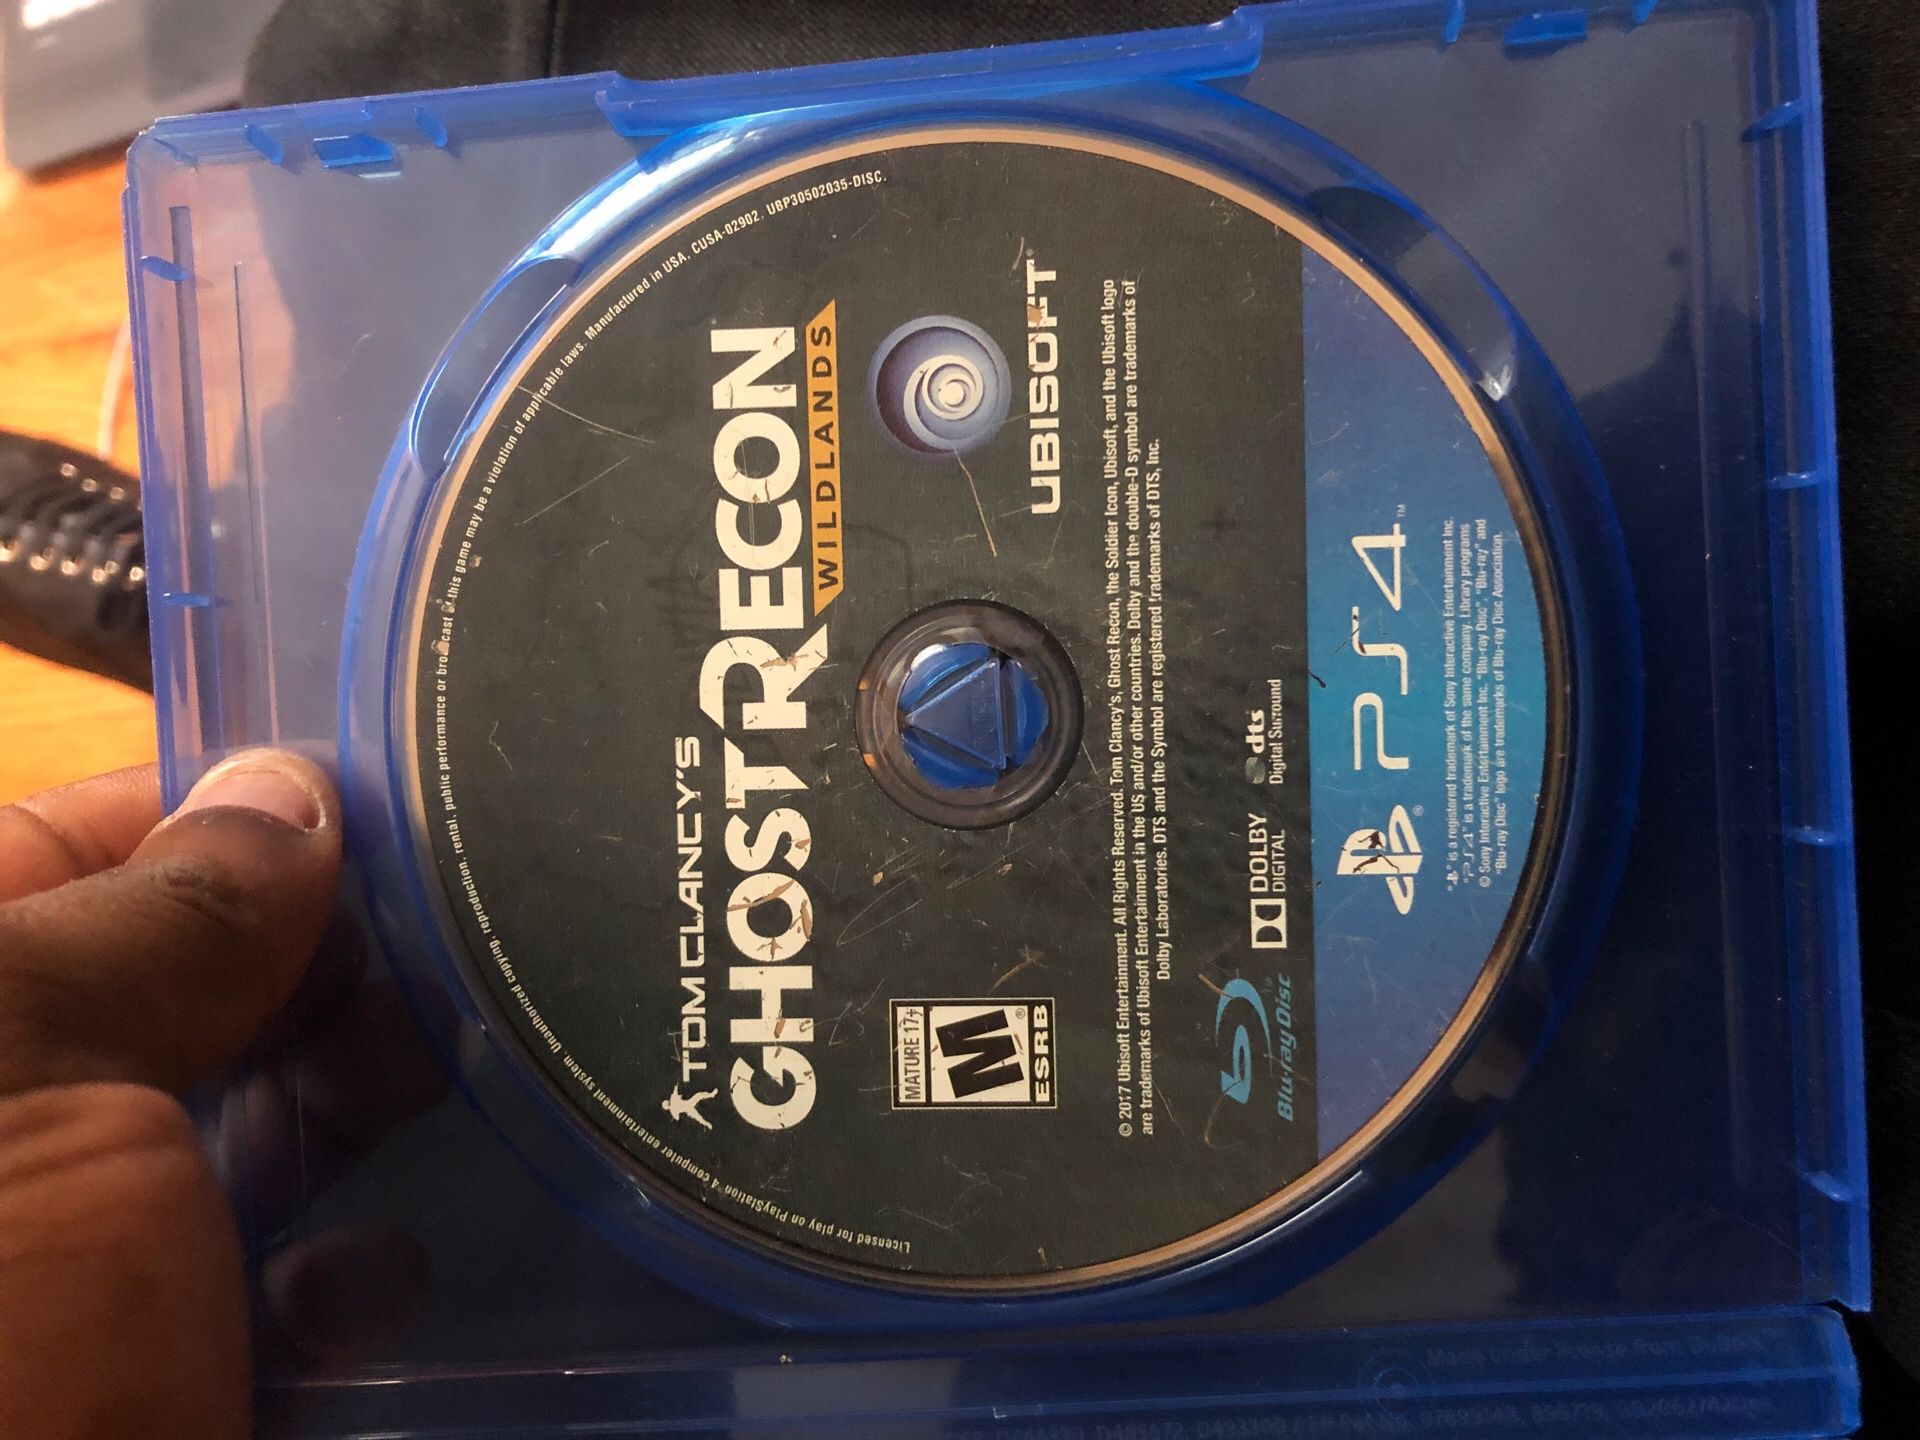 PlayStation4 Game